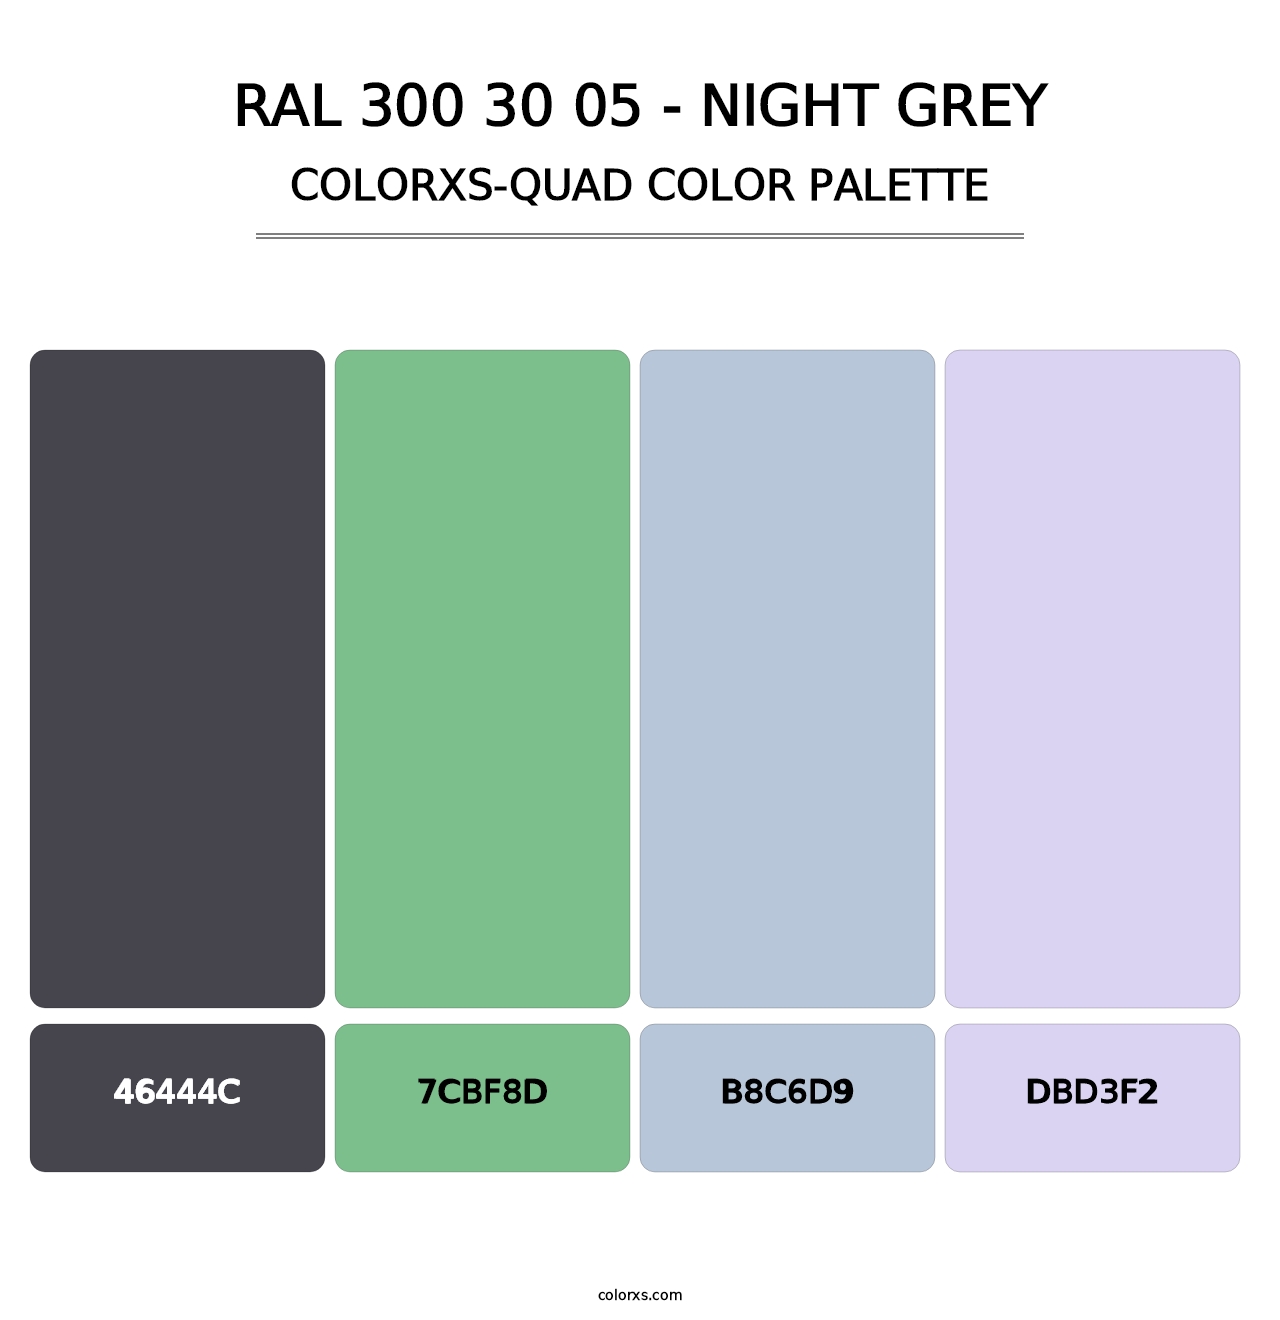 RAL 300 30 05 - Night Grey - Colorxs Quad Palette